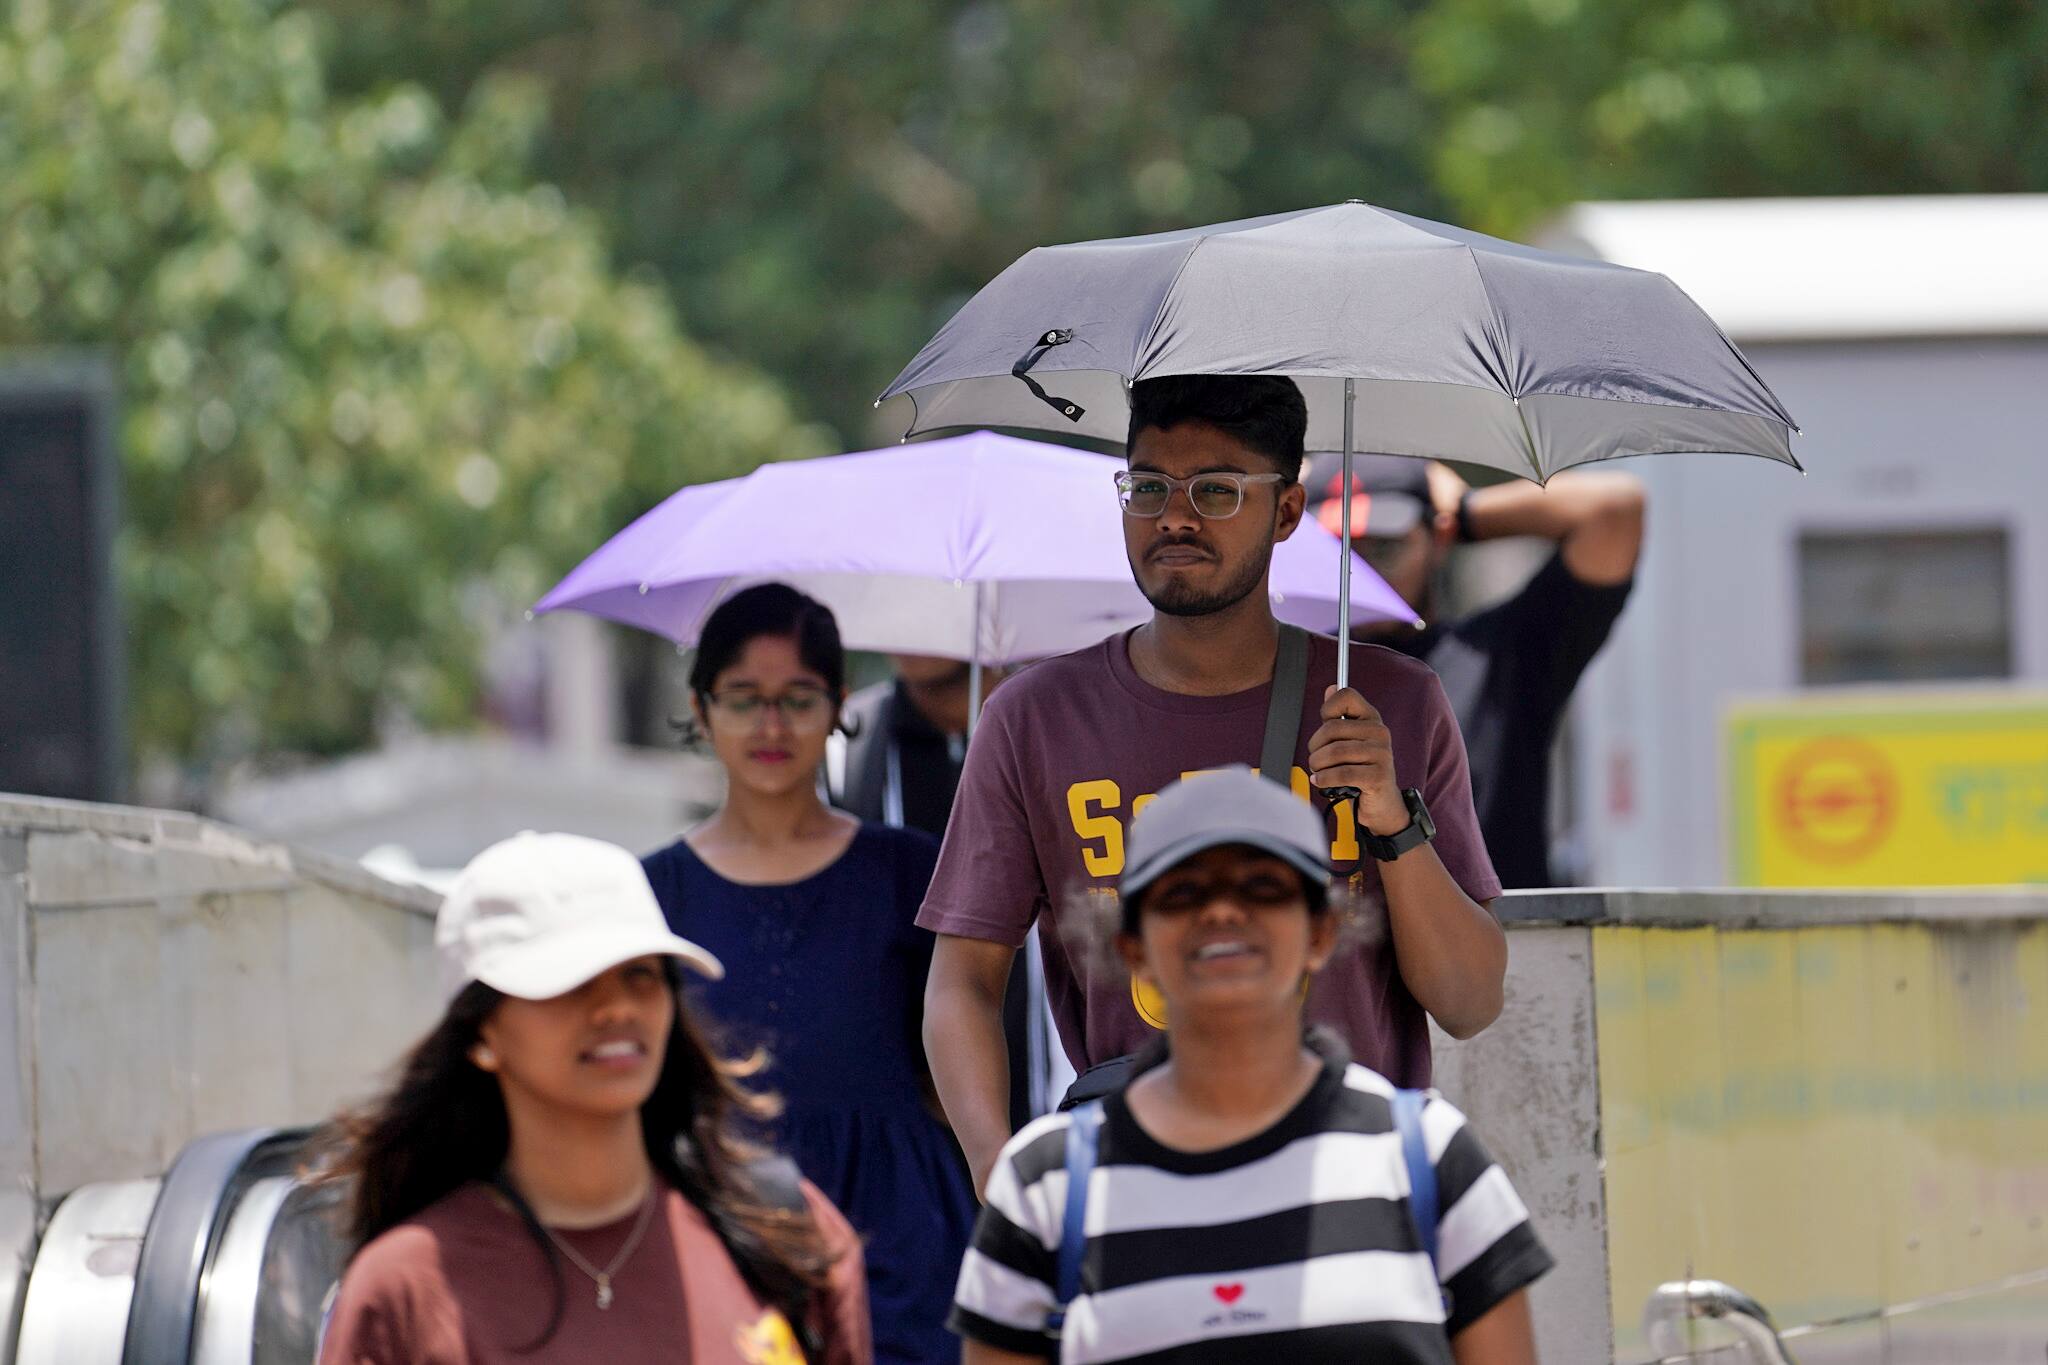 Heatwave Ends, Temperature To Fall During Next 5 Days By 2-4 Degrees